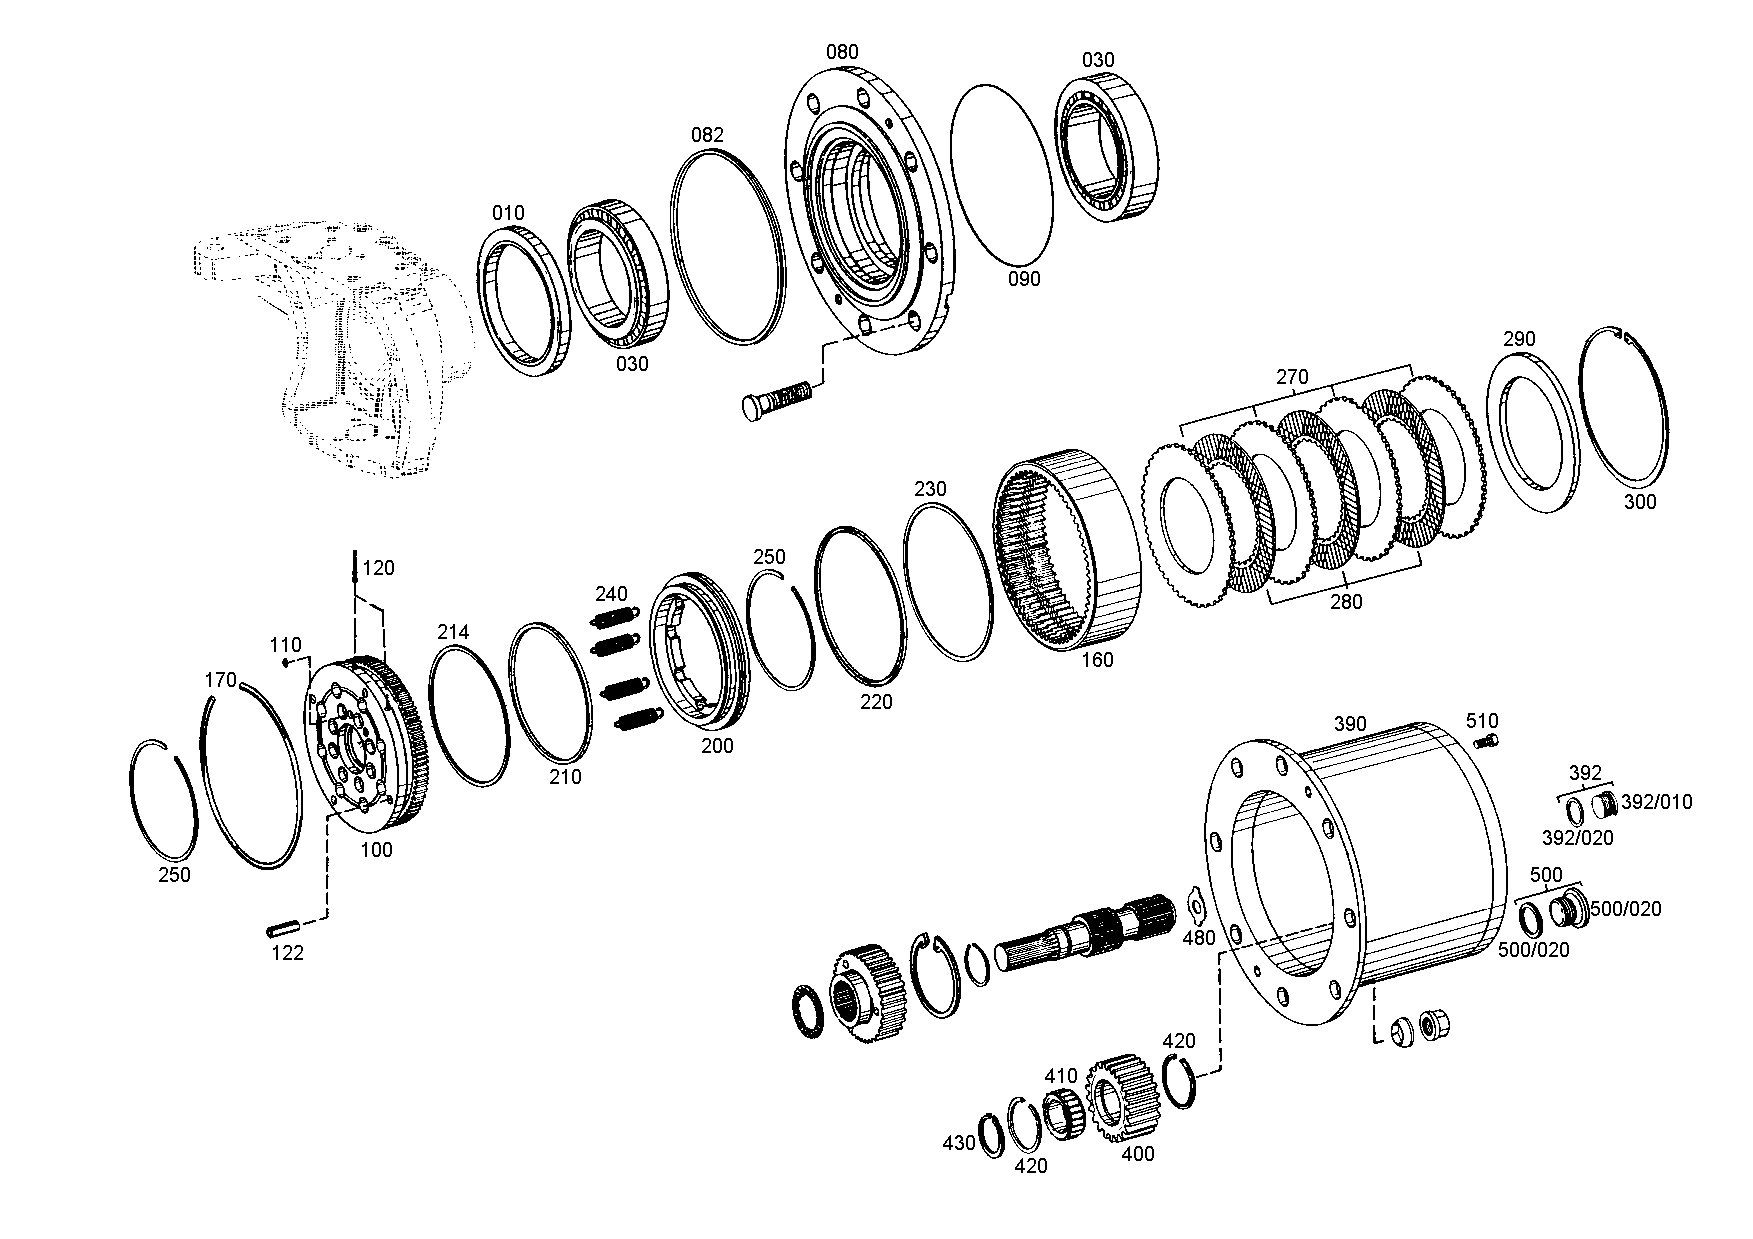 drawing for AGCO F198300020640 - PLANETARY GEAR (figure 4)